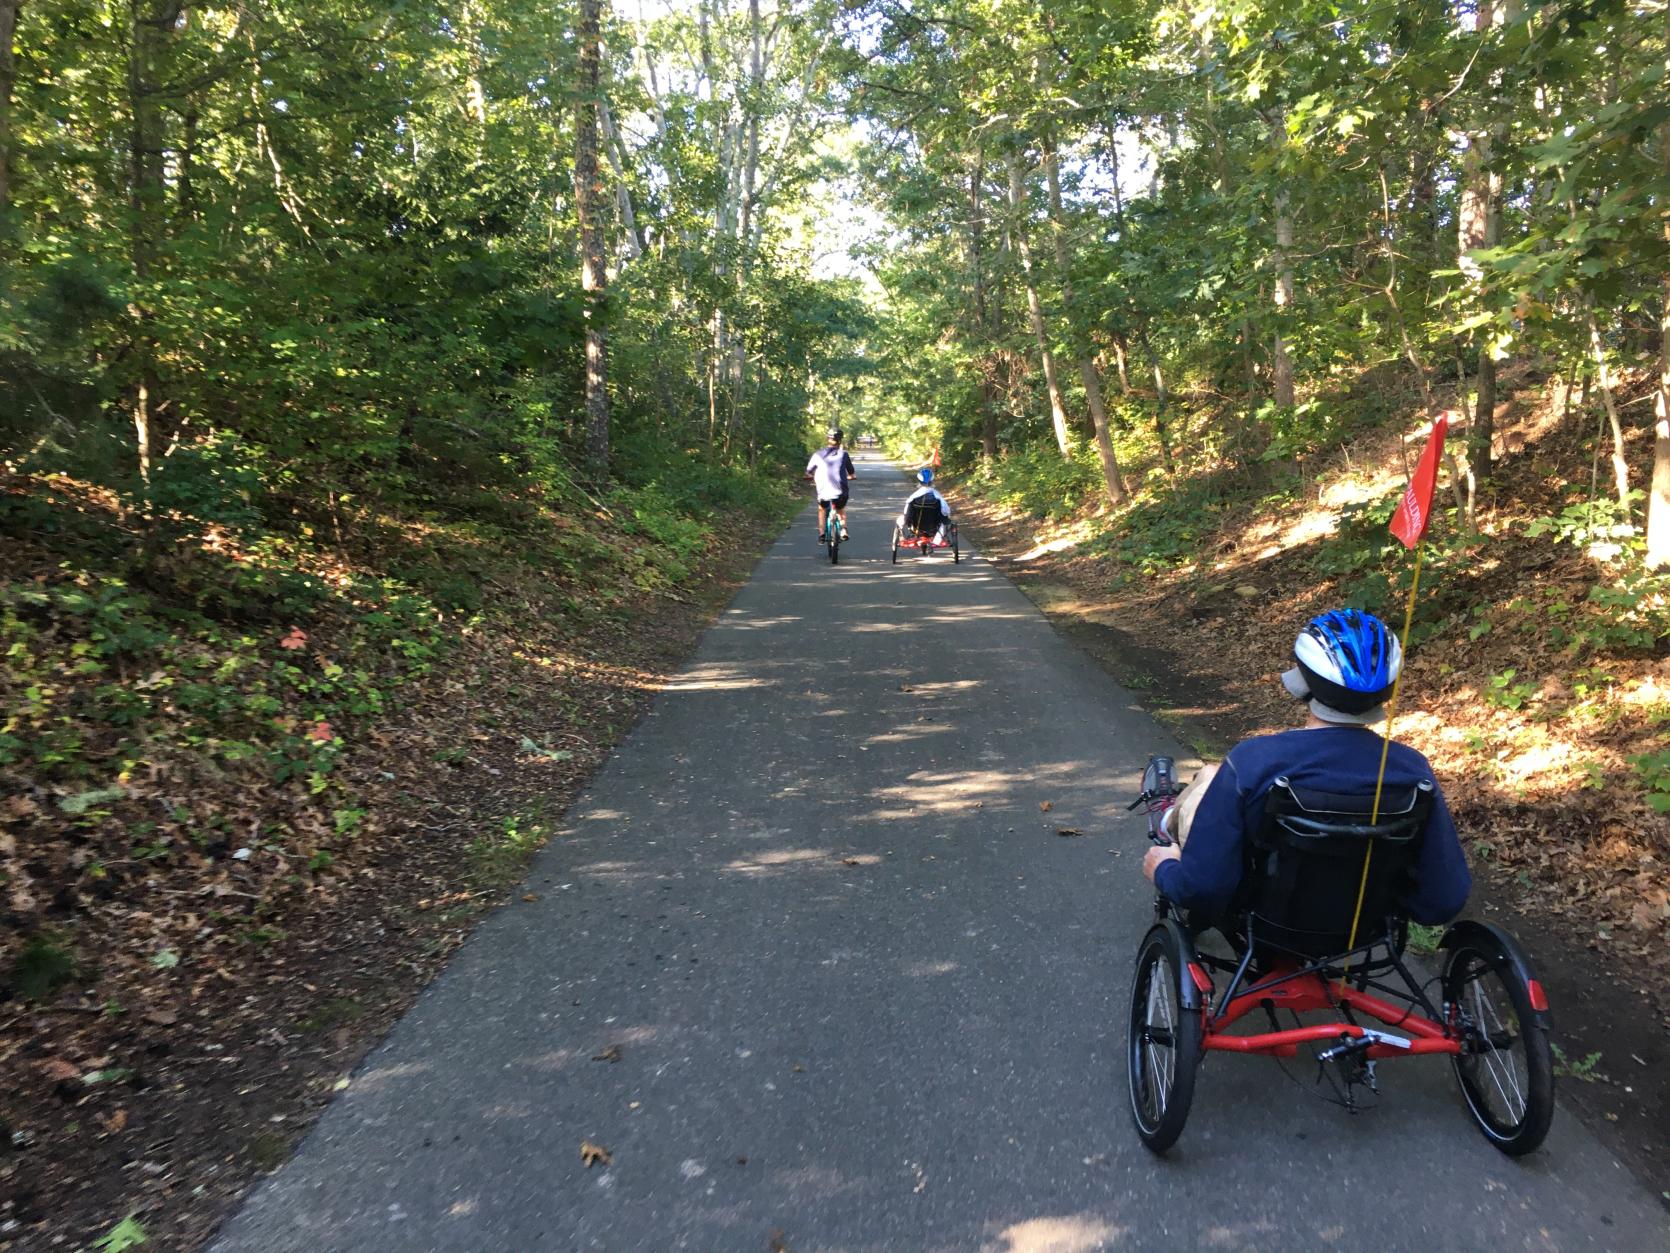 An individual riding an adaptive cycle down a paved path